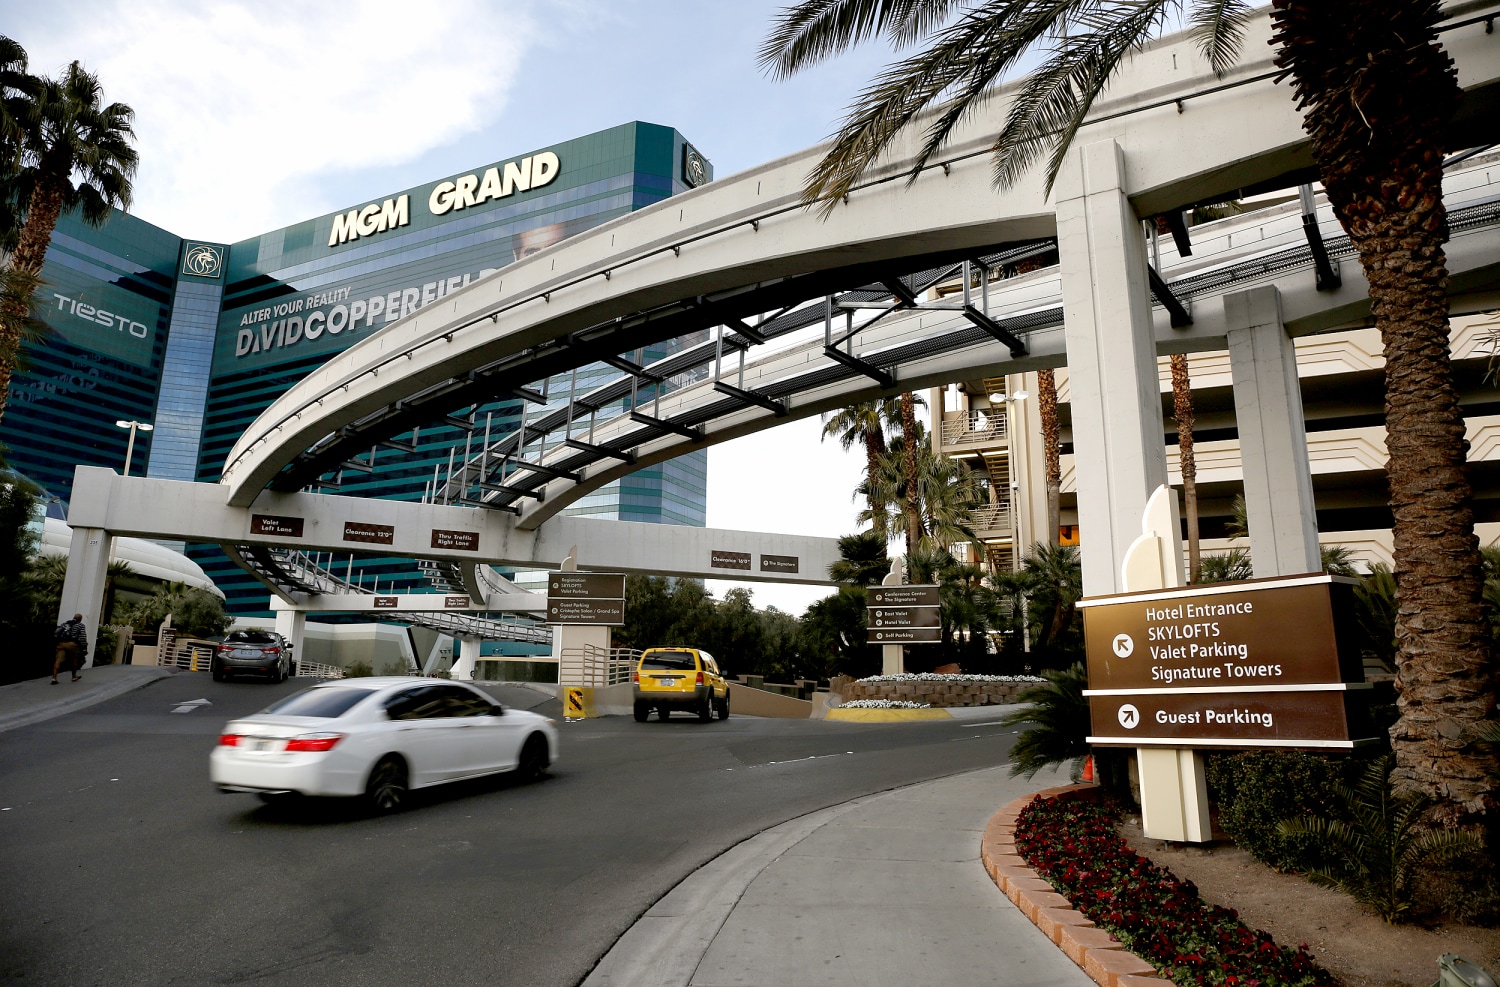 MGM Resorts resumes hotel booking on website, app following cyberattack